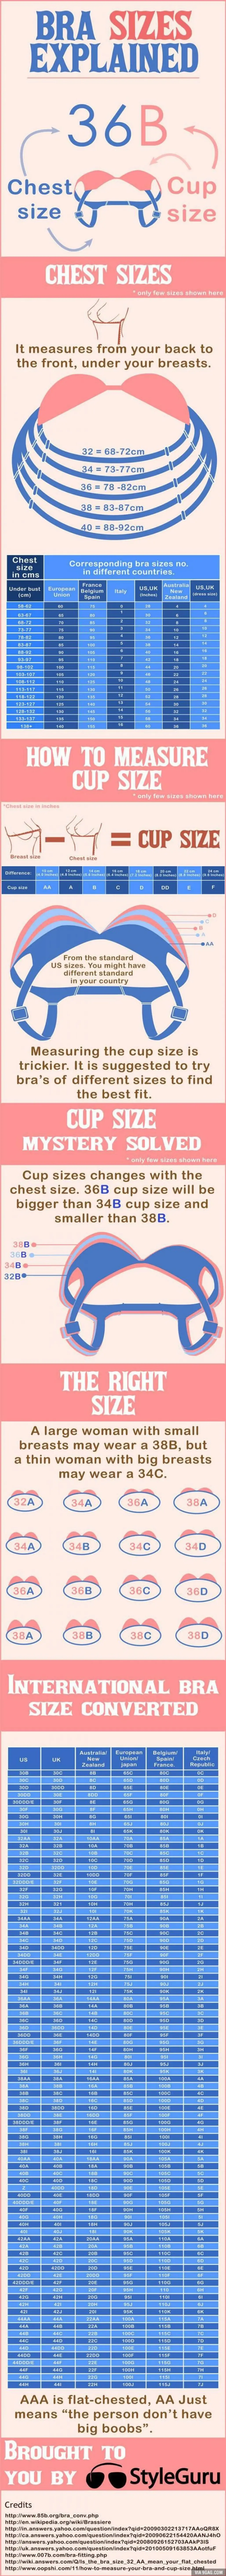 All about Bra Sizes